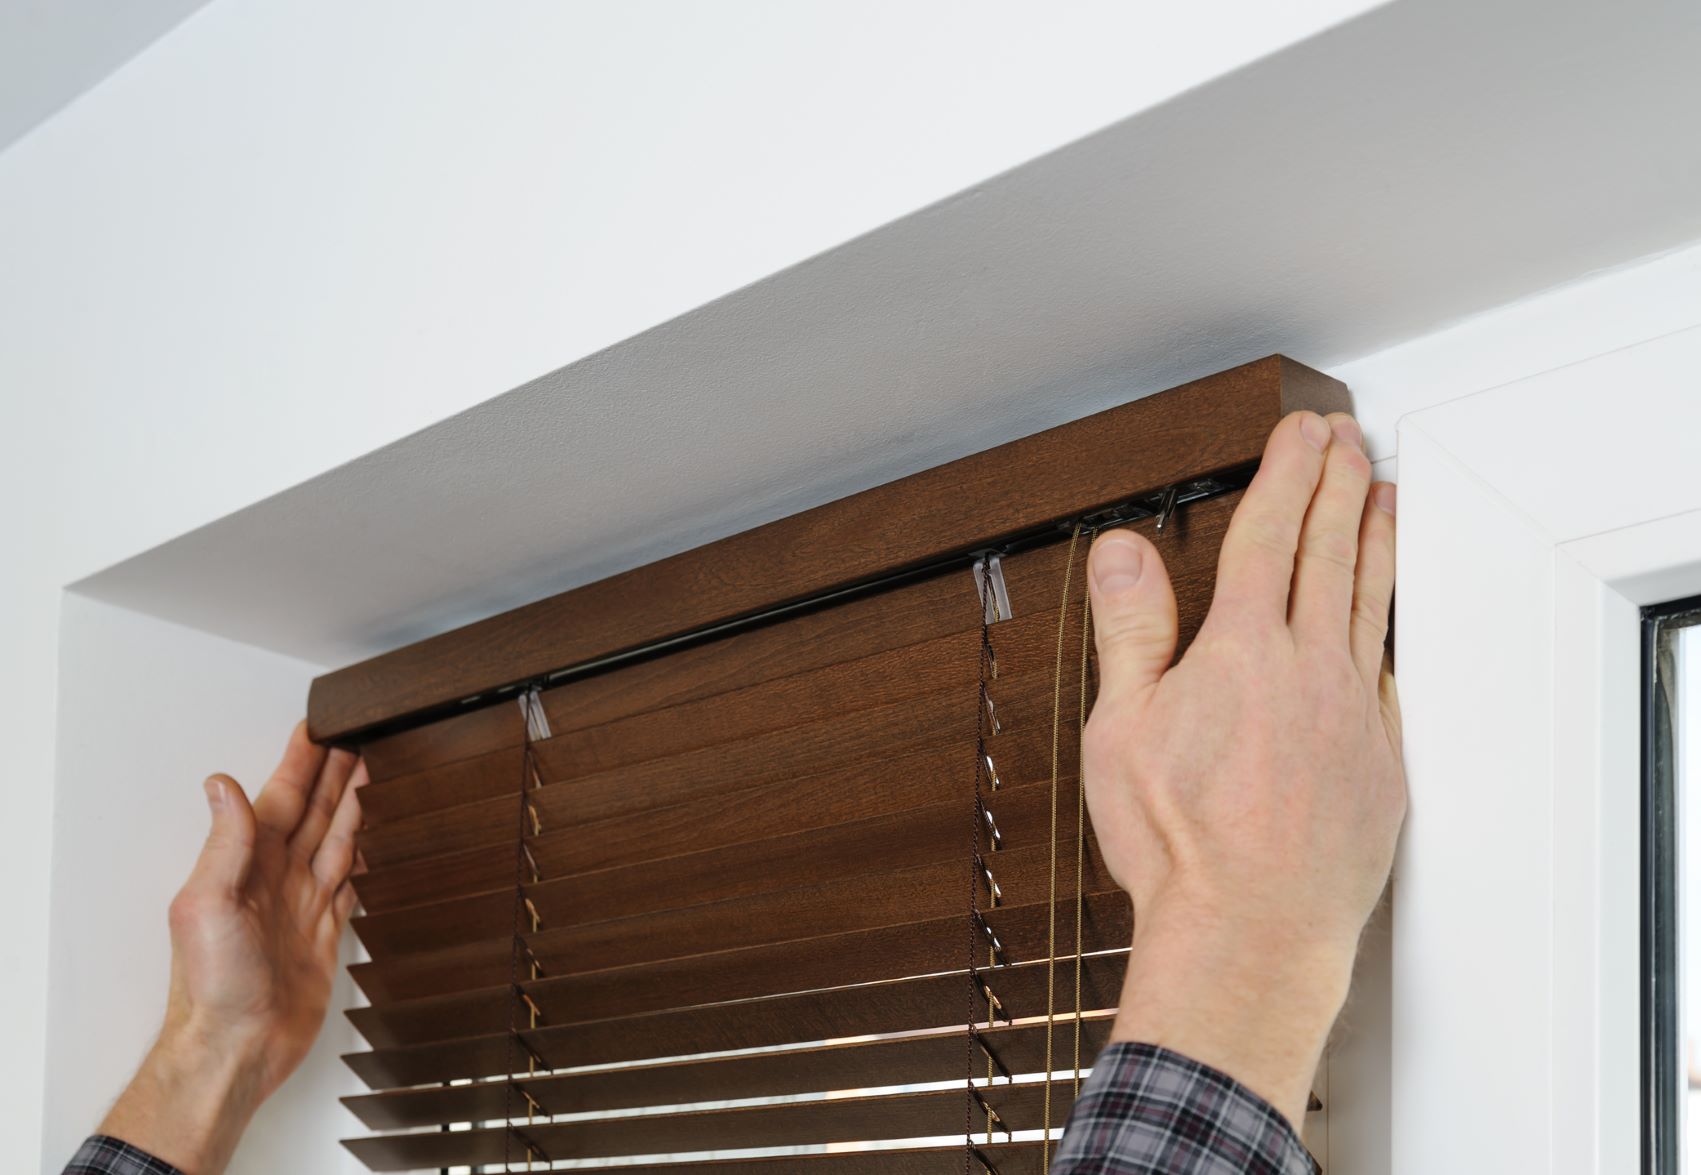 Homeowner Advice - 8 Benefits of Installing Blinds in Your Home This Year